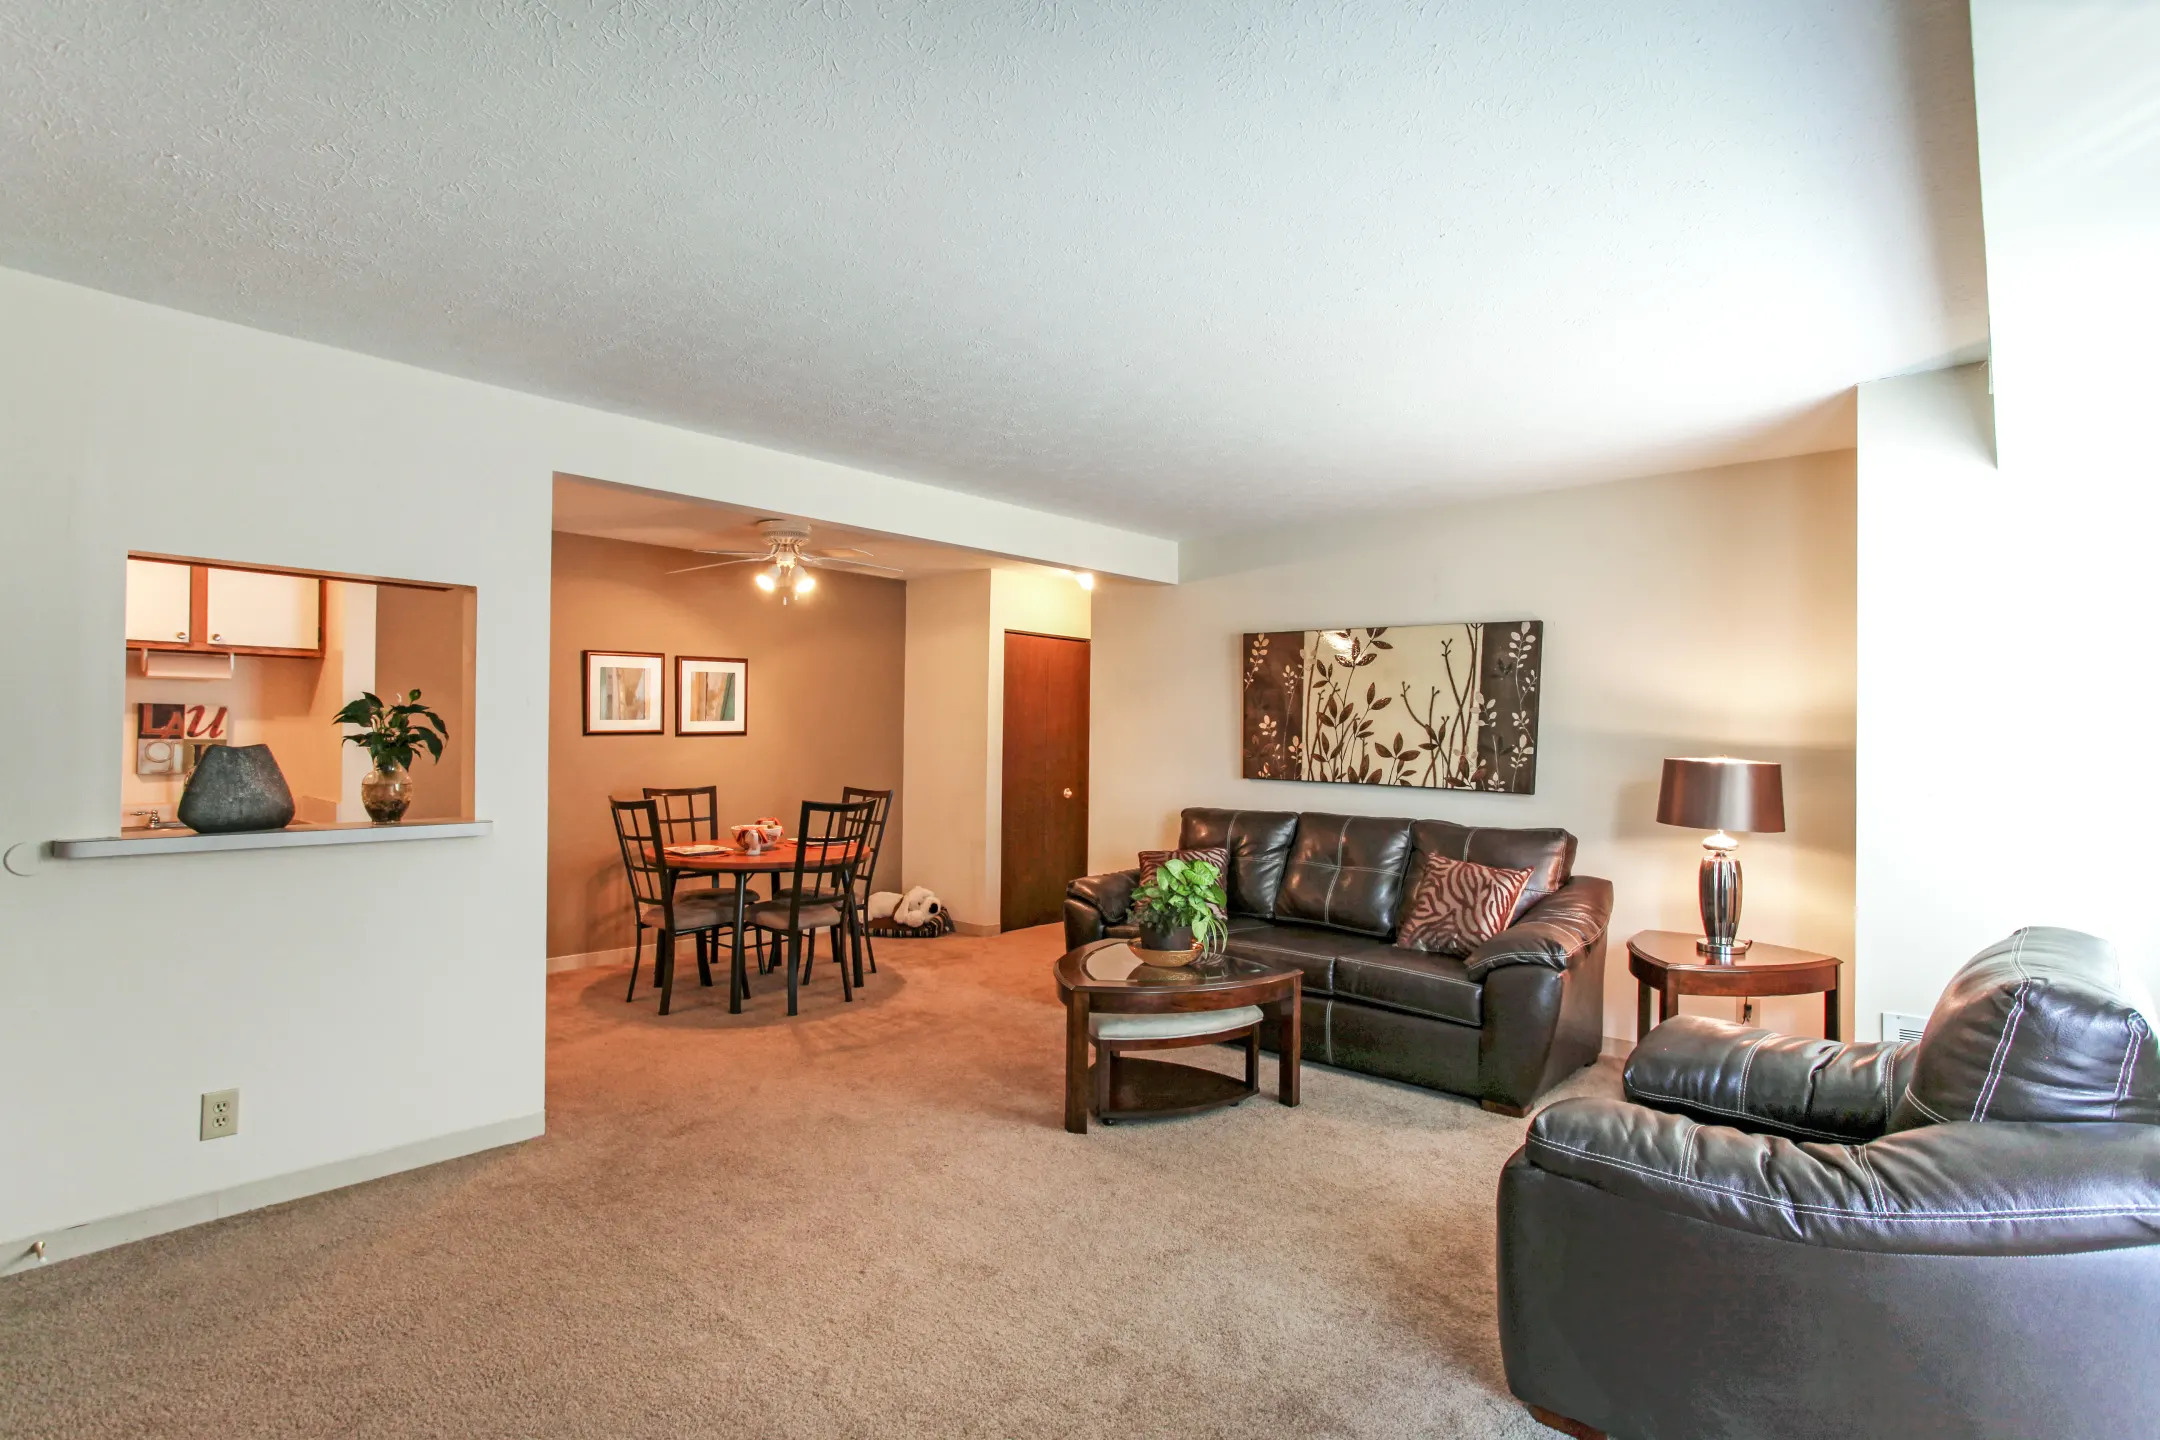 Living Room - Bay Club Apartments - Willowick, OH